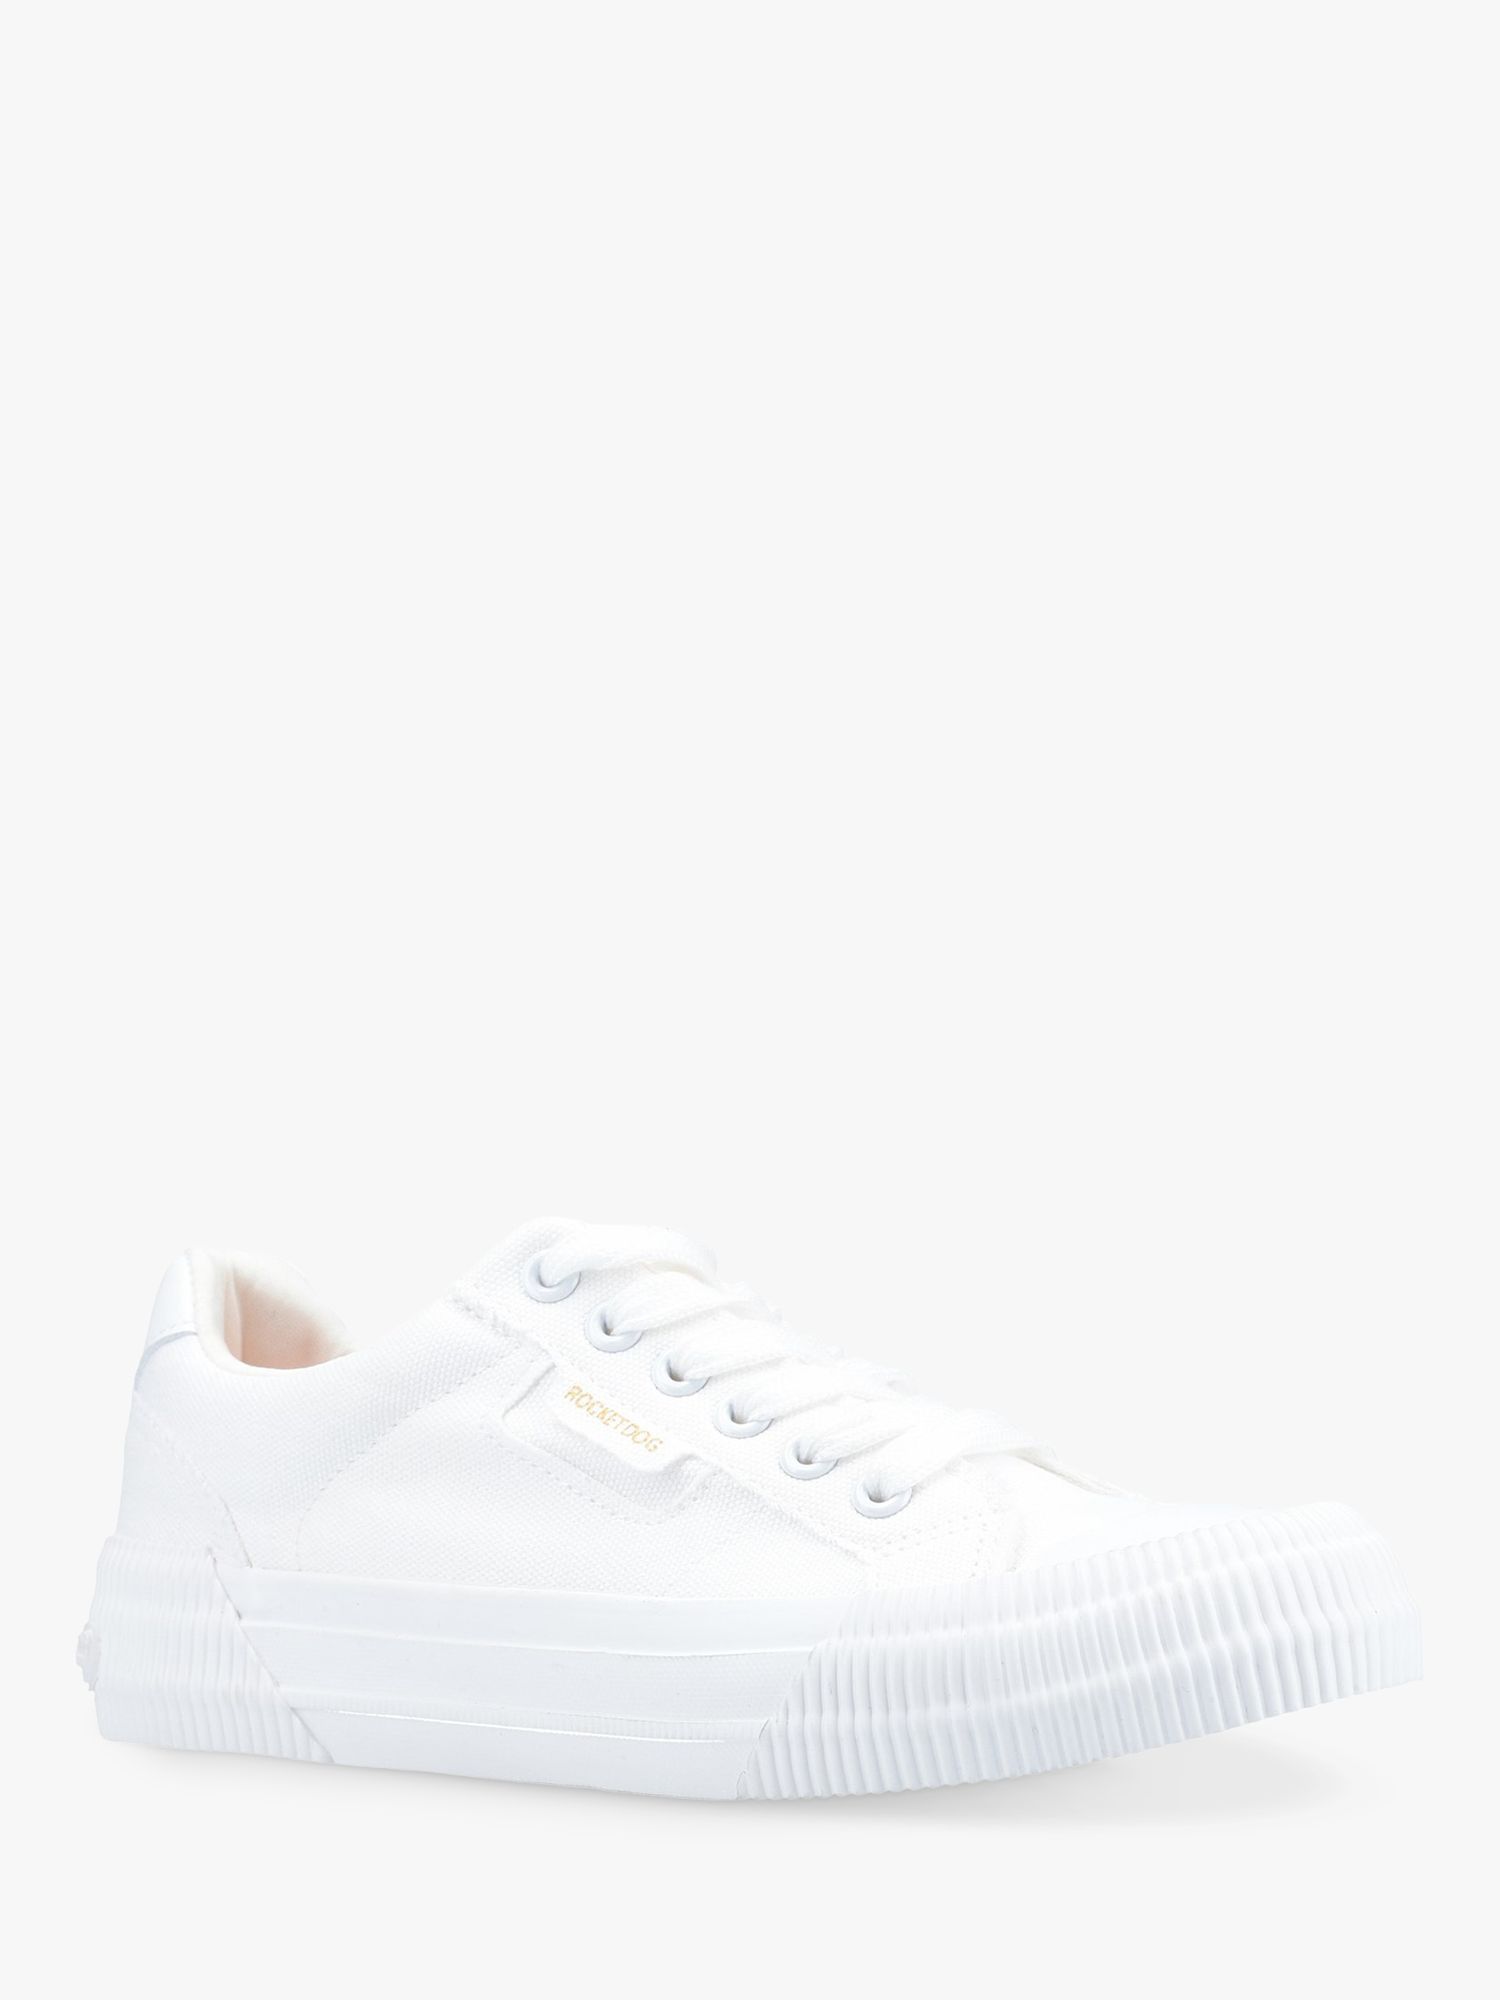 Rocket Dog Cheery Canvas Trainers, White at John Lewis & Partners